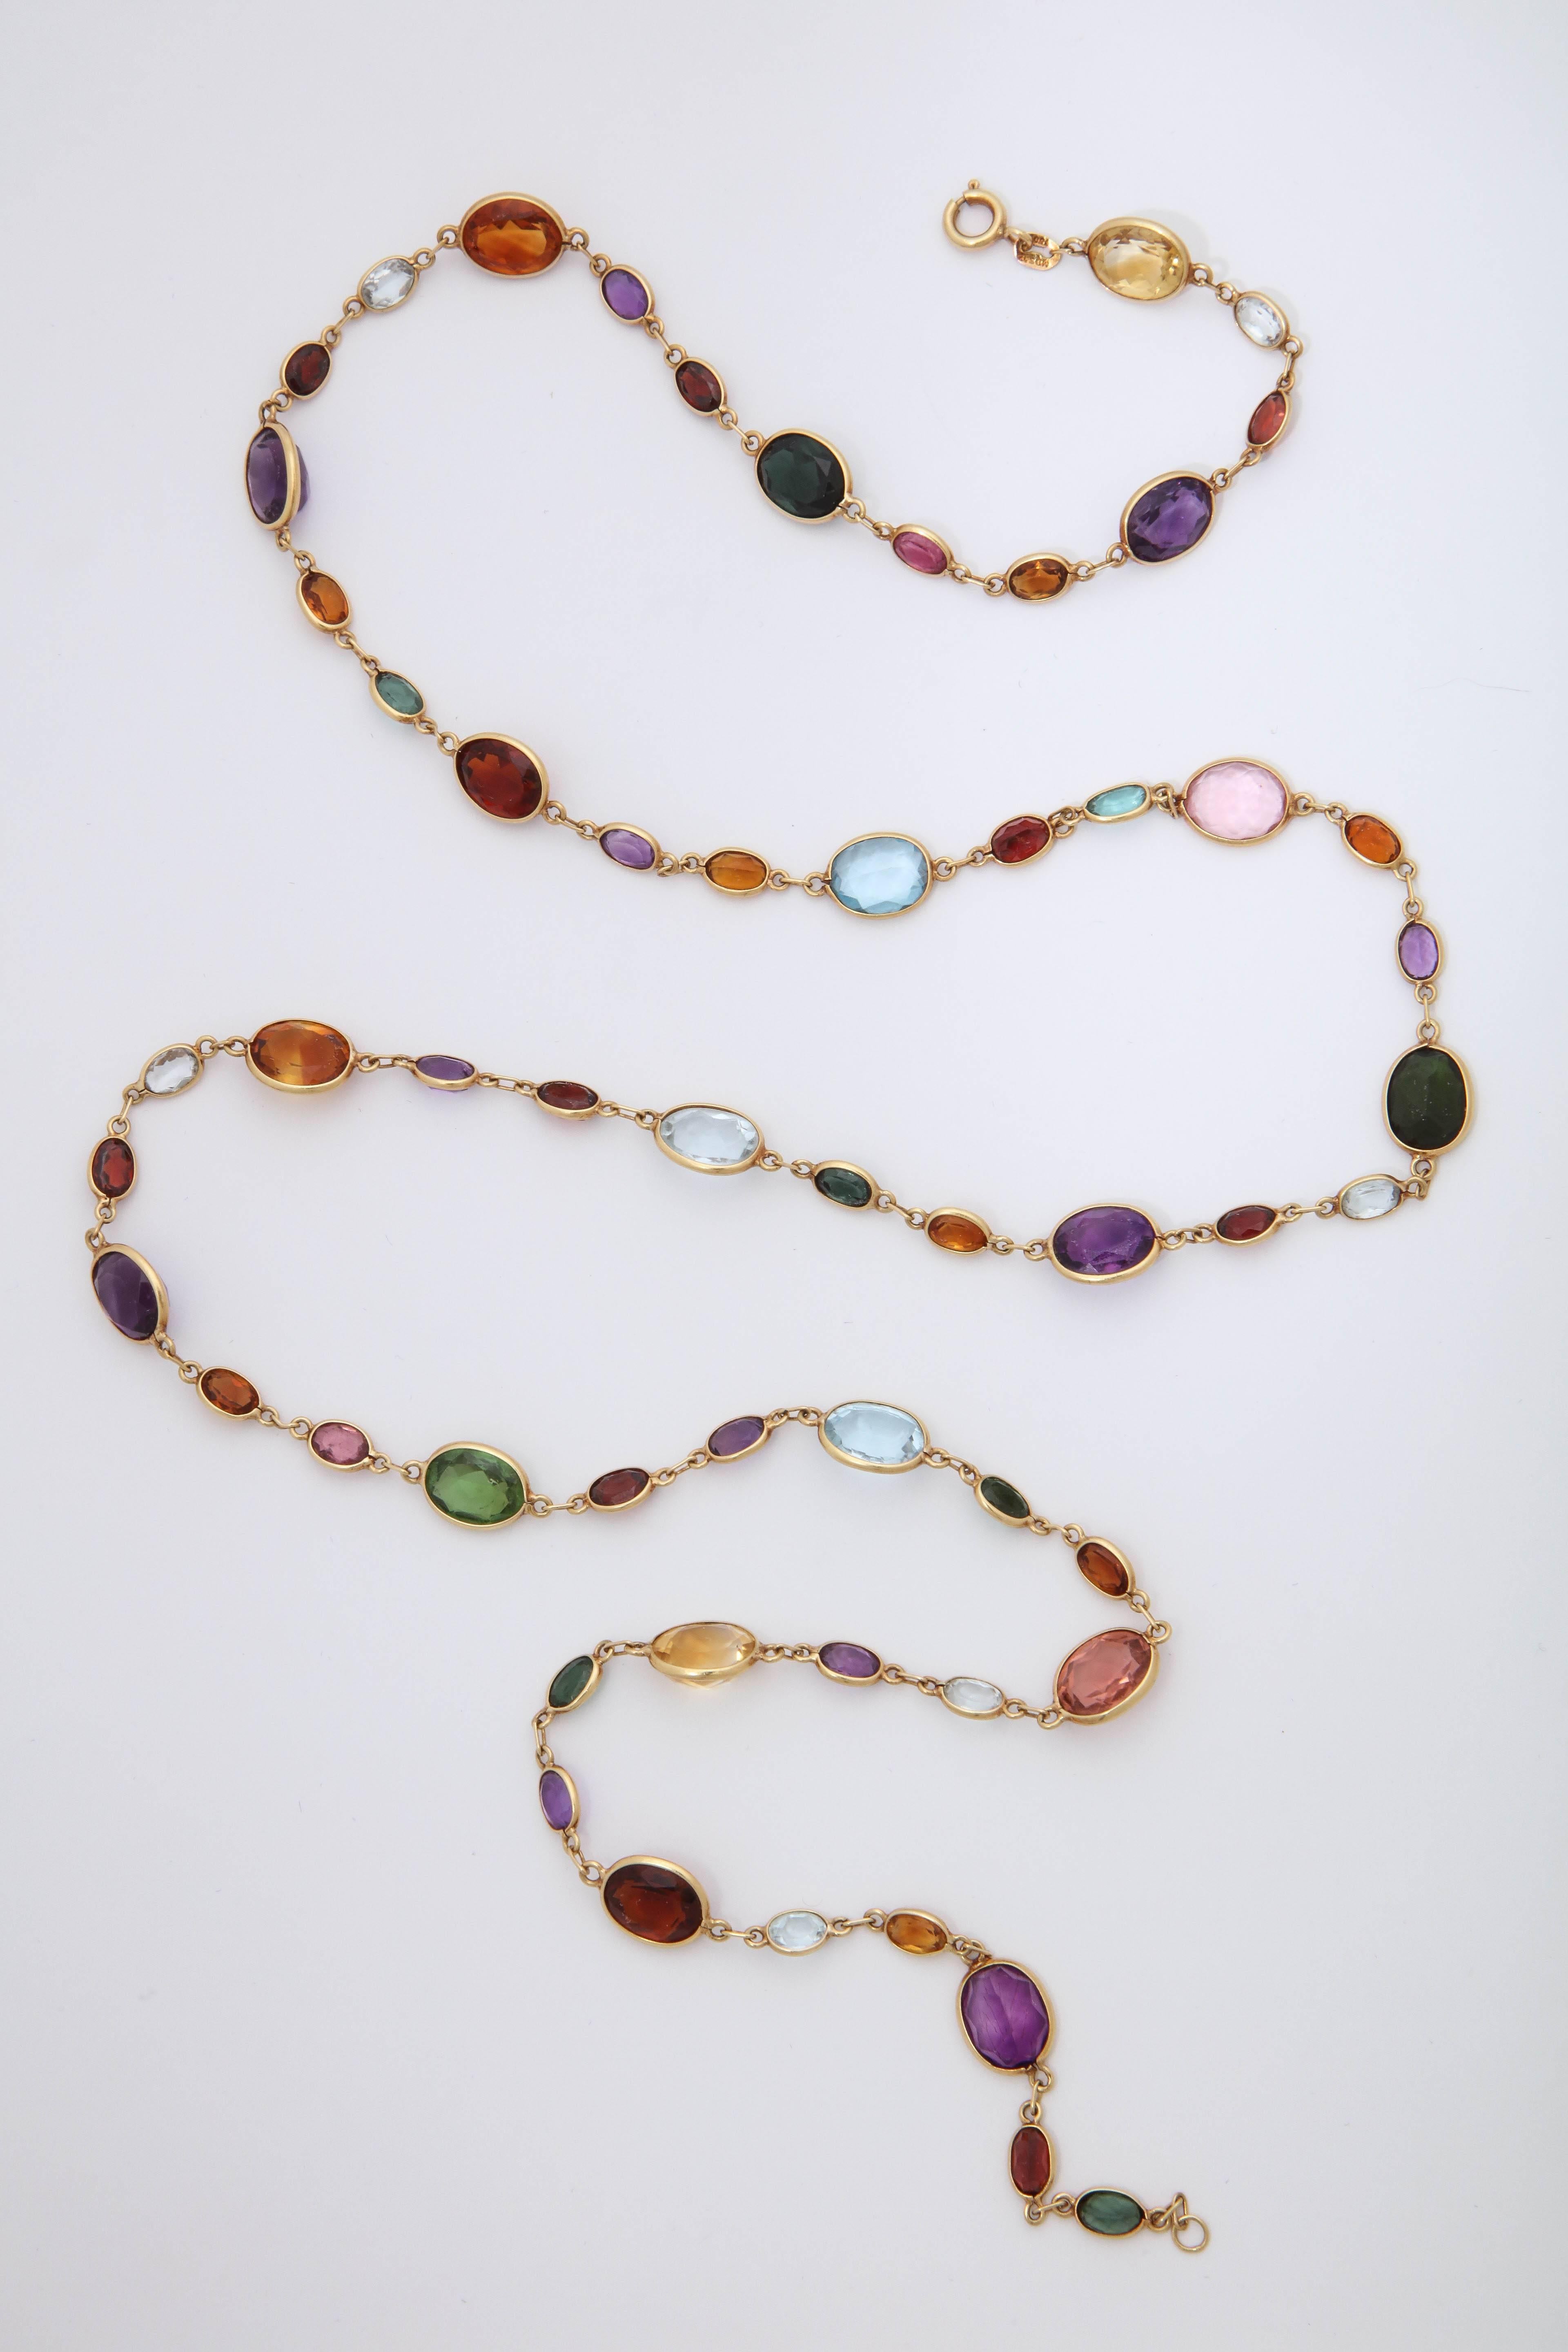 One Ladies 18kt Gold Long Chain Necklace Designed With Bezel Set Oval Cut Aquamarines, Green Tourmalines,Citrines, Pink Kunzites Amethysts And Garnets. 31 Inches Long May Be Worn Doubled. Created In The 1960's In The United States Of America.All